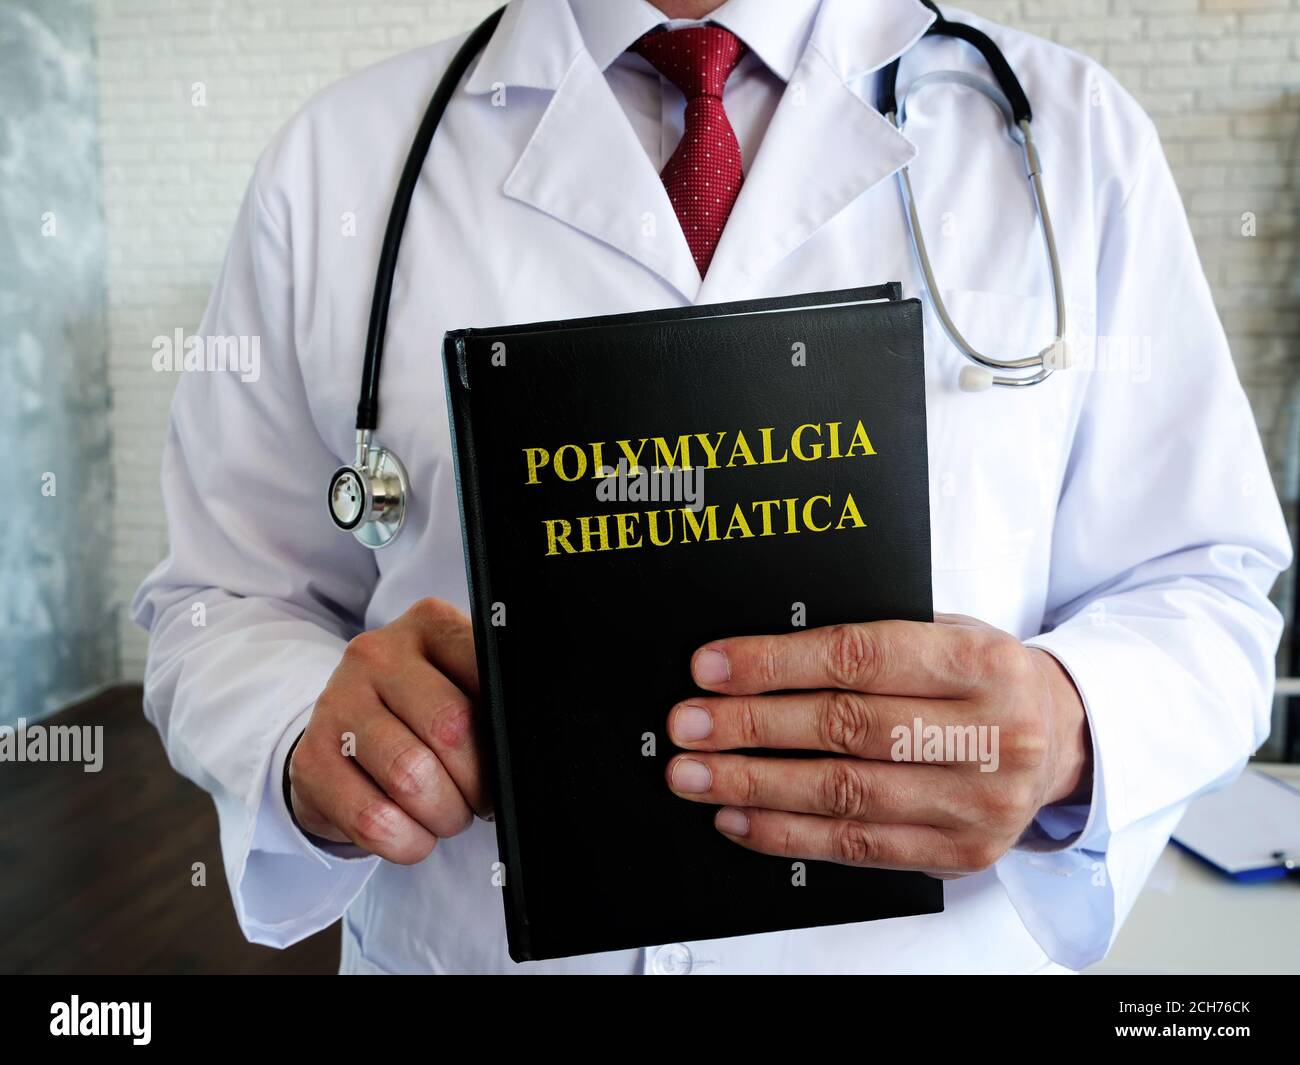 The doctor is holding a book about the polymyalgia rheumatica disease. Stock Photo